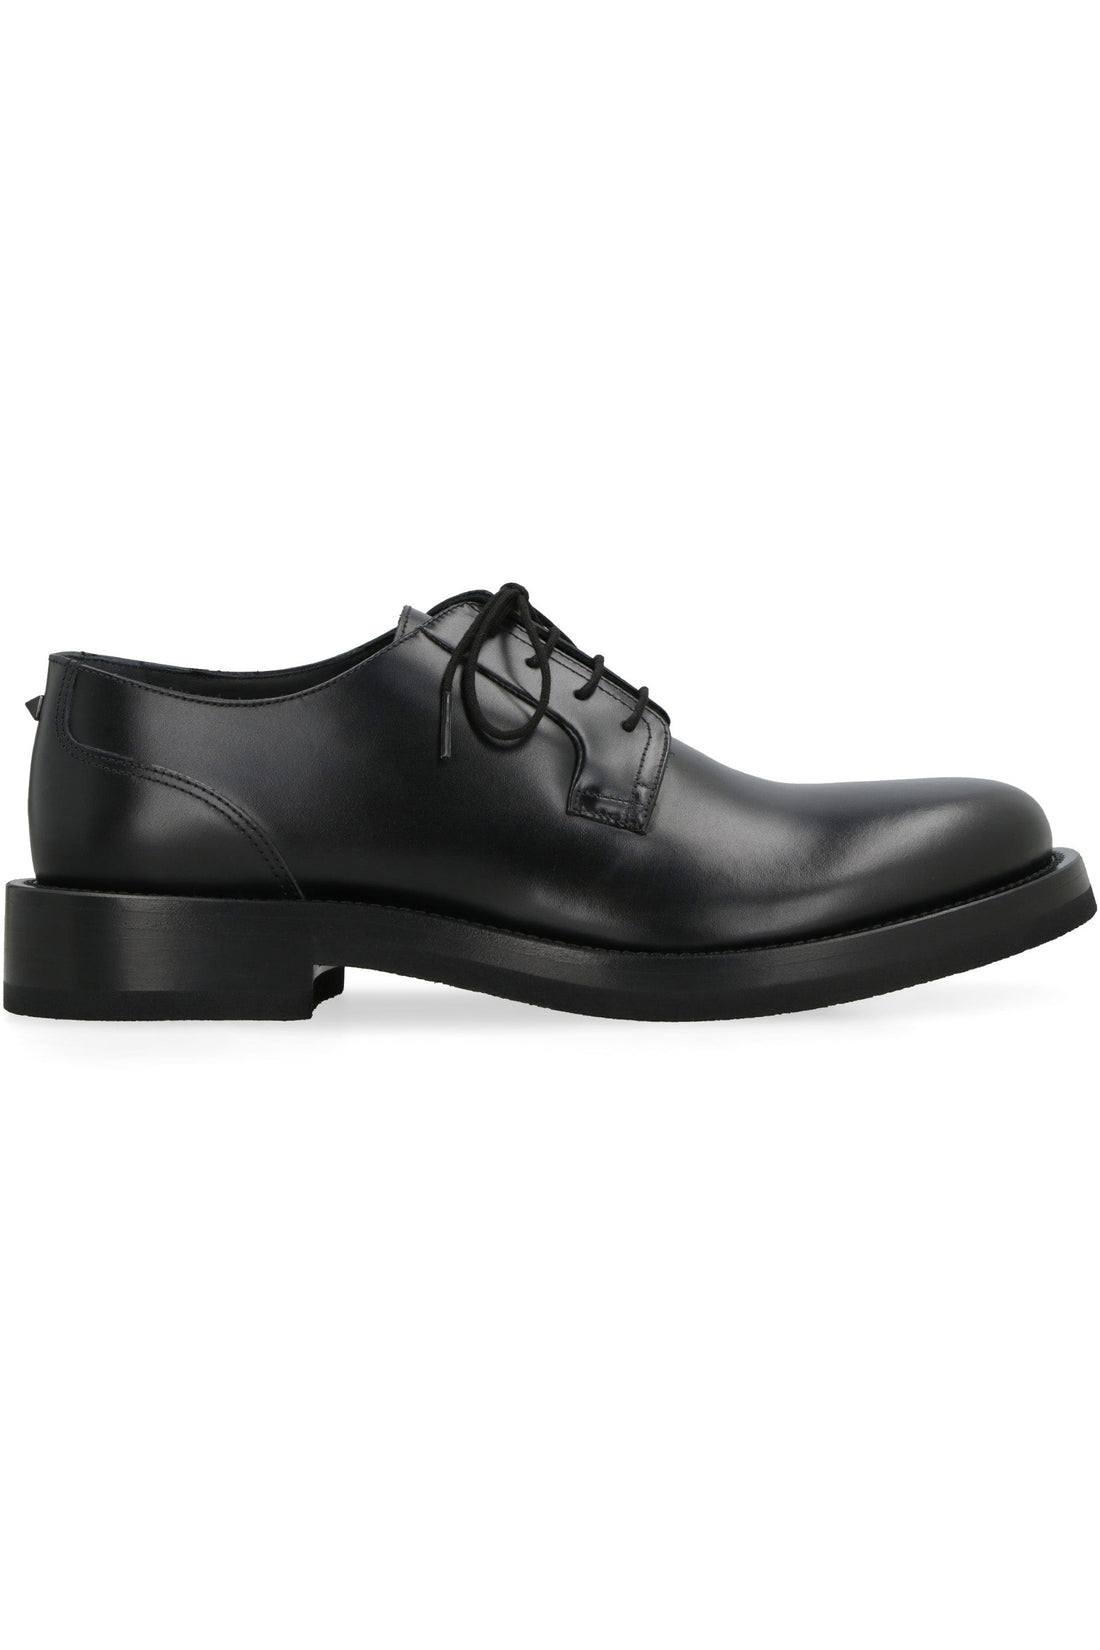 Valentino-OUTLET-SALE-Derby Rockstud Essential leather lace-up shoes-ARCHIVIST